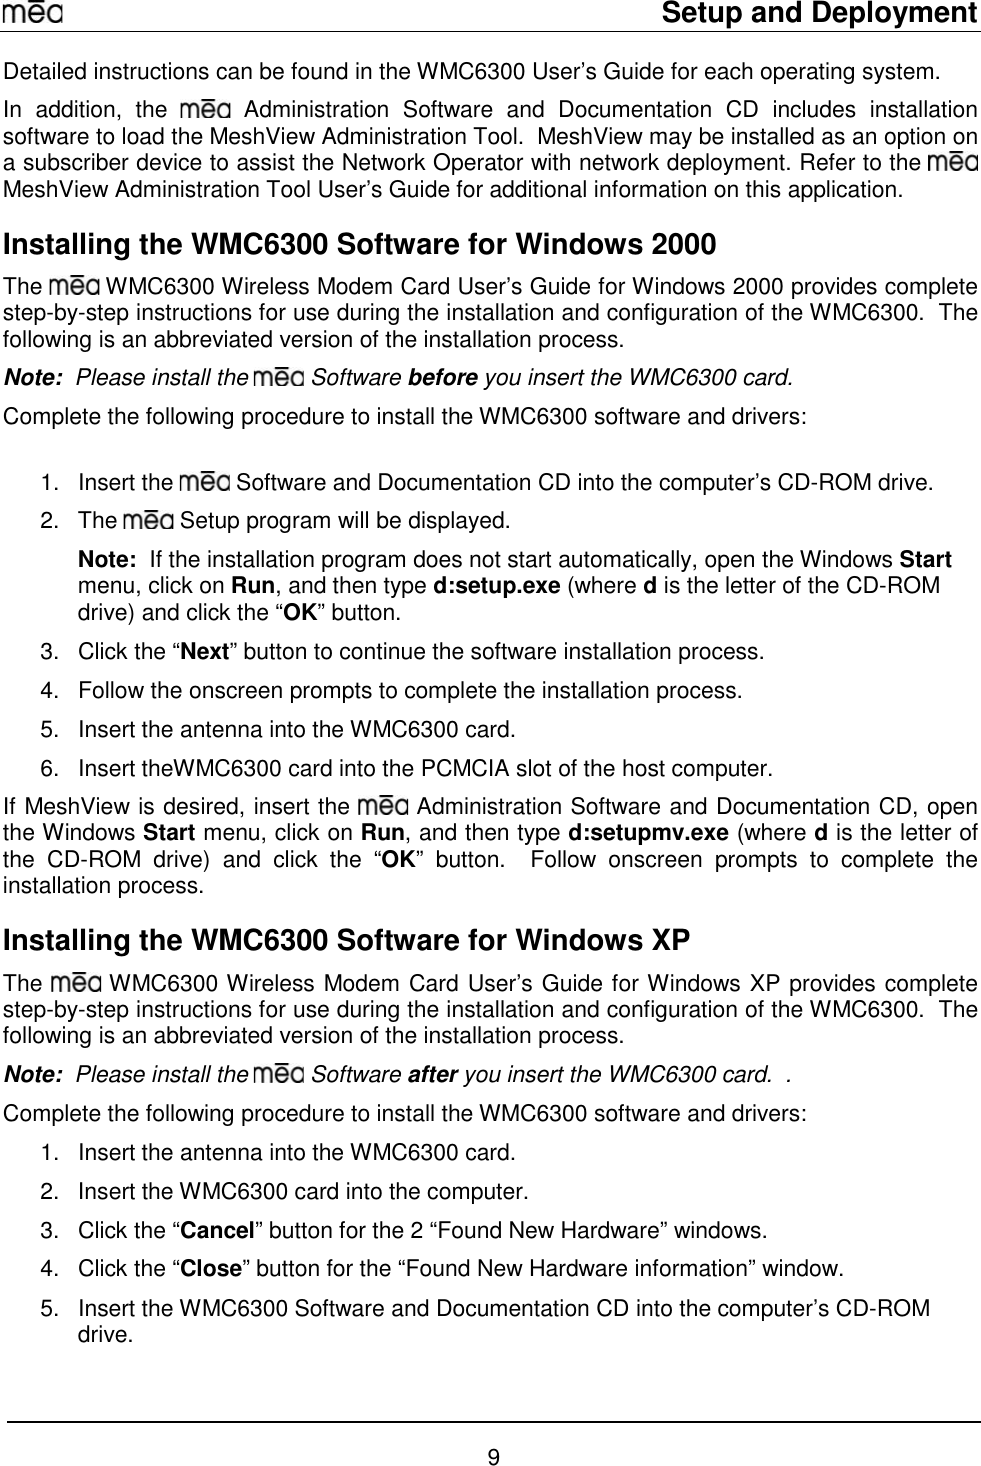     Setup and Deployment  9 Detailed instructions can be found in the WMC6300 User’s Guide for each operating system. In addition, the   Administration Software and Documentation CD includes installation software to load the MeshView Administration Tool.  MeshView may be installed as an option on a subscriber device to assist the Network Operator with network deployment. Refer to the   MeshView Administration Tool User’s Guide for additional information on this application. Installing the WMC6300 Software for Windows 2000 The   WMC6300 Wireless Modem Card User’s Guide for Windows 2000 provides complete step-by-step instructions for use during the installation and configuration of the WMC6300.  The following is an abbreviated version of the installation process. Note:  Please install the   Software before you insert the WMC6300 card.   Complete the following procedure to install the WMC6300 software and drivers:  1. Insert the   Software and Documentation CD into the computer’s CD-ROM drive. 2. The   Setup program will be displayed.   Note:  If the installation program does not start automatically, open the Windows Start menu, click on Run, and then type d:setup.exe (where d is the letter of the CD-ROM drive) and click the “OK” button.  3.  Click the “Next” button to continue the software installation process. 4.  Follow the onscreen prompts to complete the installation process. 5.  Insert the antenna into the WMC6300 card. 6.  Insert theWMC6300 card into the PCMCIA slot of the host computer. If MeshView is desired, insert the   Administration Software and Documentation CD, open the Windows Start menu, click on Run, and then type d:setupmv.exe (where d is the letter of the CD-ROM drive) and click the “OK” button.  Follow onscreen prompts to complete the installation process. Installing the WMC6300 Software for Windows XP The   WMC6300 Wireless Modem Card User’s Guide for Windows XP provides complete step-by-step instructions for use during the installation and configuration of the WMC6300.  The following is an abbreviated version of the installation process. Note:  Please install the   Software after you insert the WMC6300 card.  .   Complete the following procedure to install the WMC6300 software and drivers: 1.  Insert the antenna into the WMC6300 card. 2.  Insert the WMC6300 card into the computer. 3.  Click the “Cancel” button for the 2 “Found New Hardware” windows.   4.  Click the “Close” button for the “Found New Hardware information” window. 5.  Insert the WMC6300 Software and Documentation CD into the computer’s CD-ROM drive. 